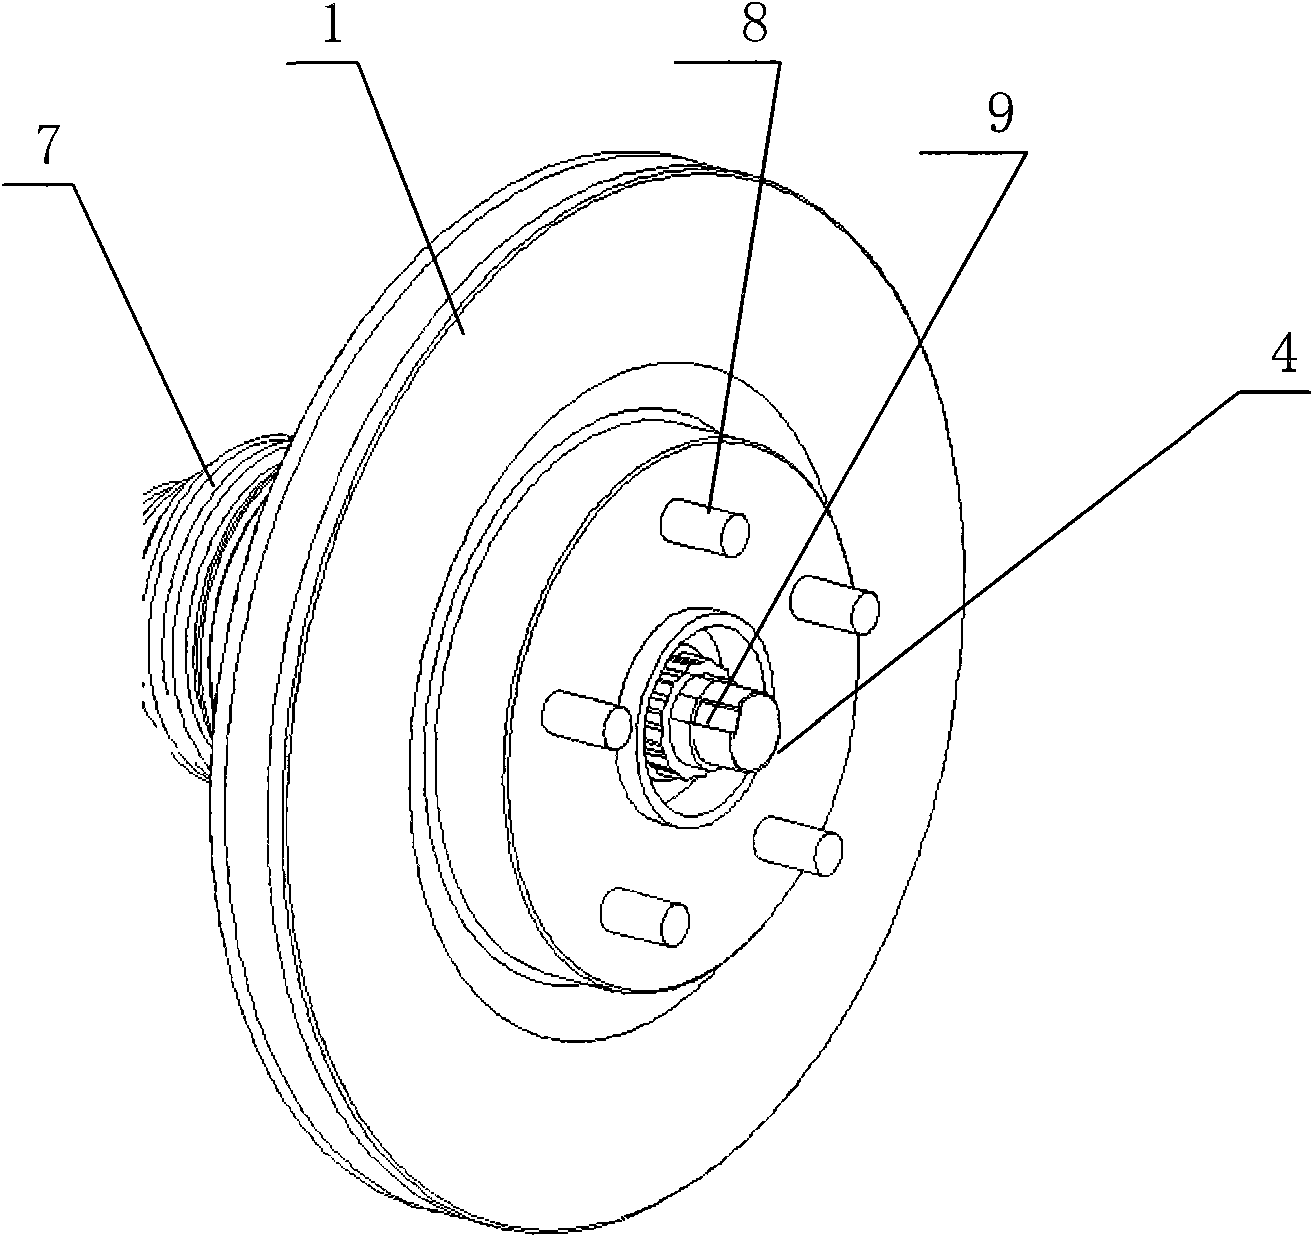 Structure for locking wheel locking nut and drive shaft